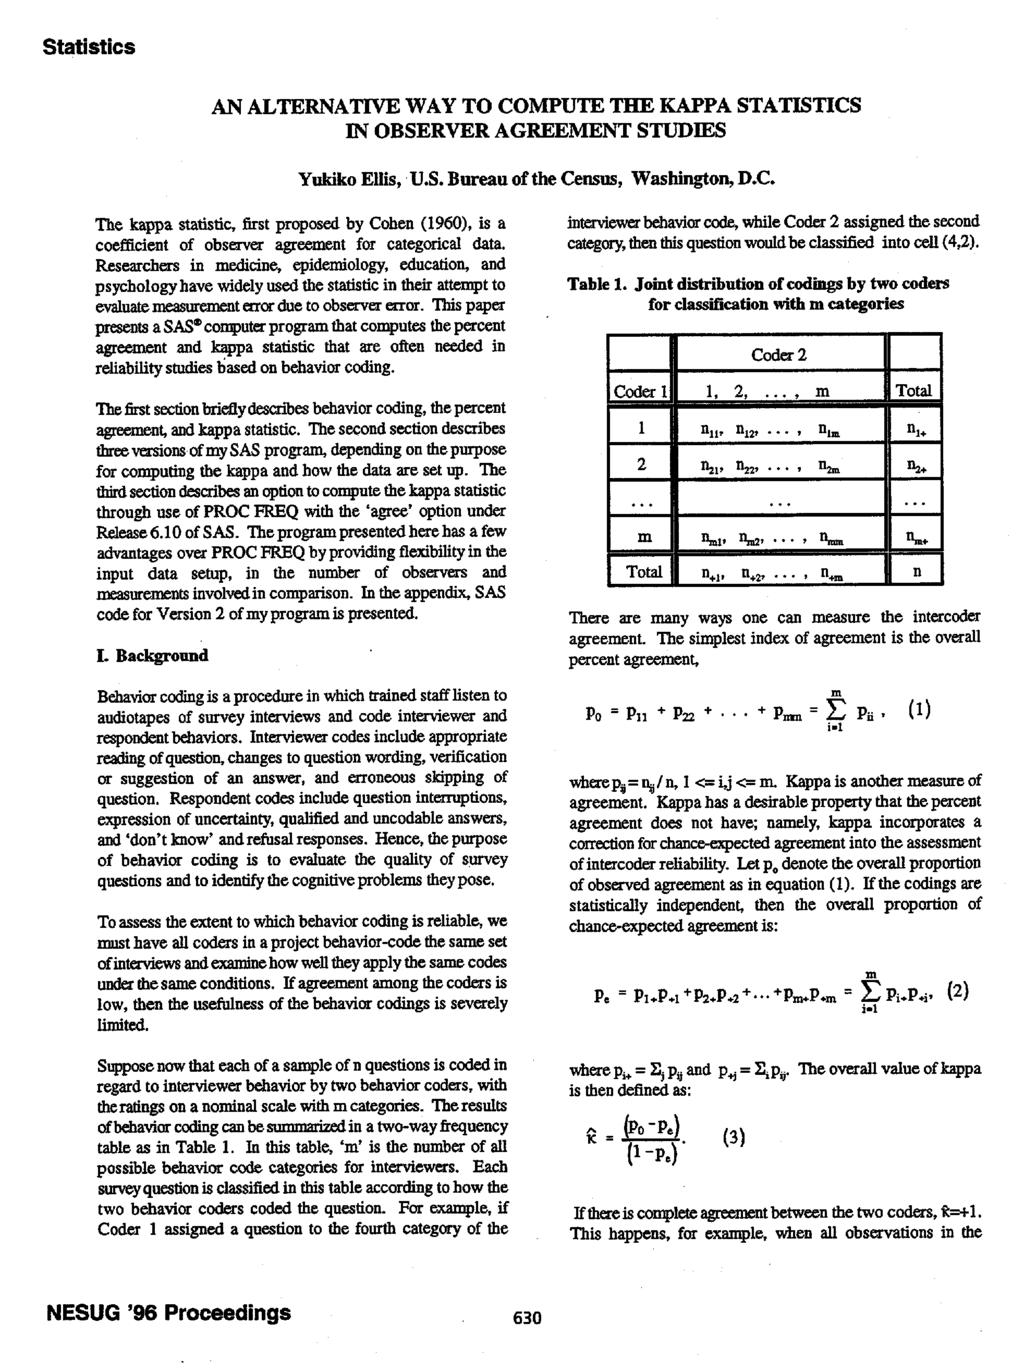 AN ALTERNATIVE WAY TO COMPUTE THE KAPPA STATISTICS IN OBSERVER AGREEMENT STUDIES Yukiko Ellis,. U.S. Bureau of the Census, Washington, D.C. The kappa statistic, first proposed by Cohen (1960), is a coefficient of observer agreement for categorical data.